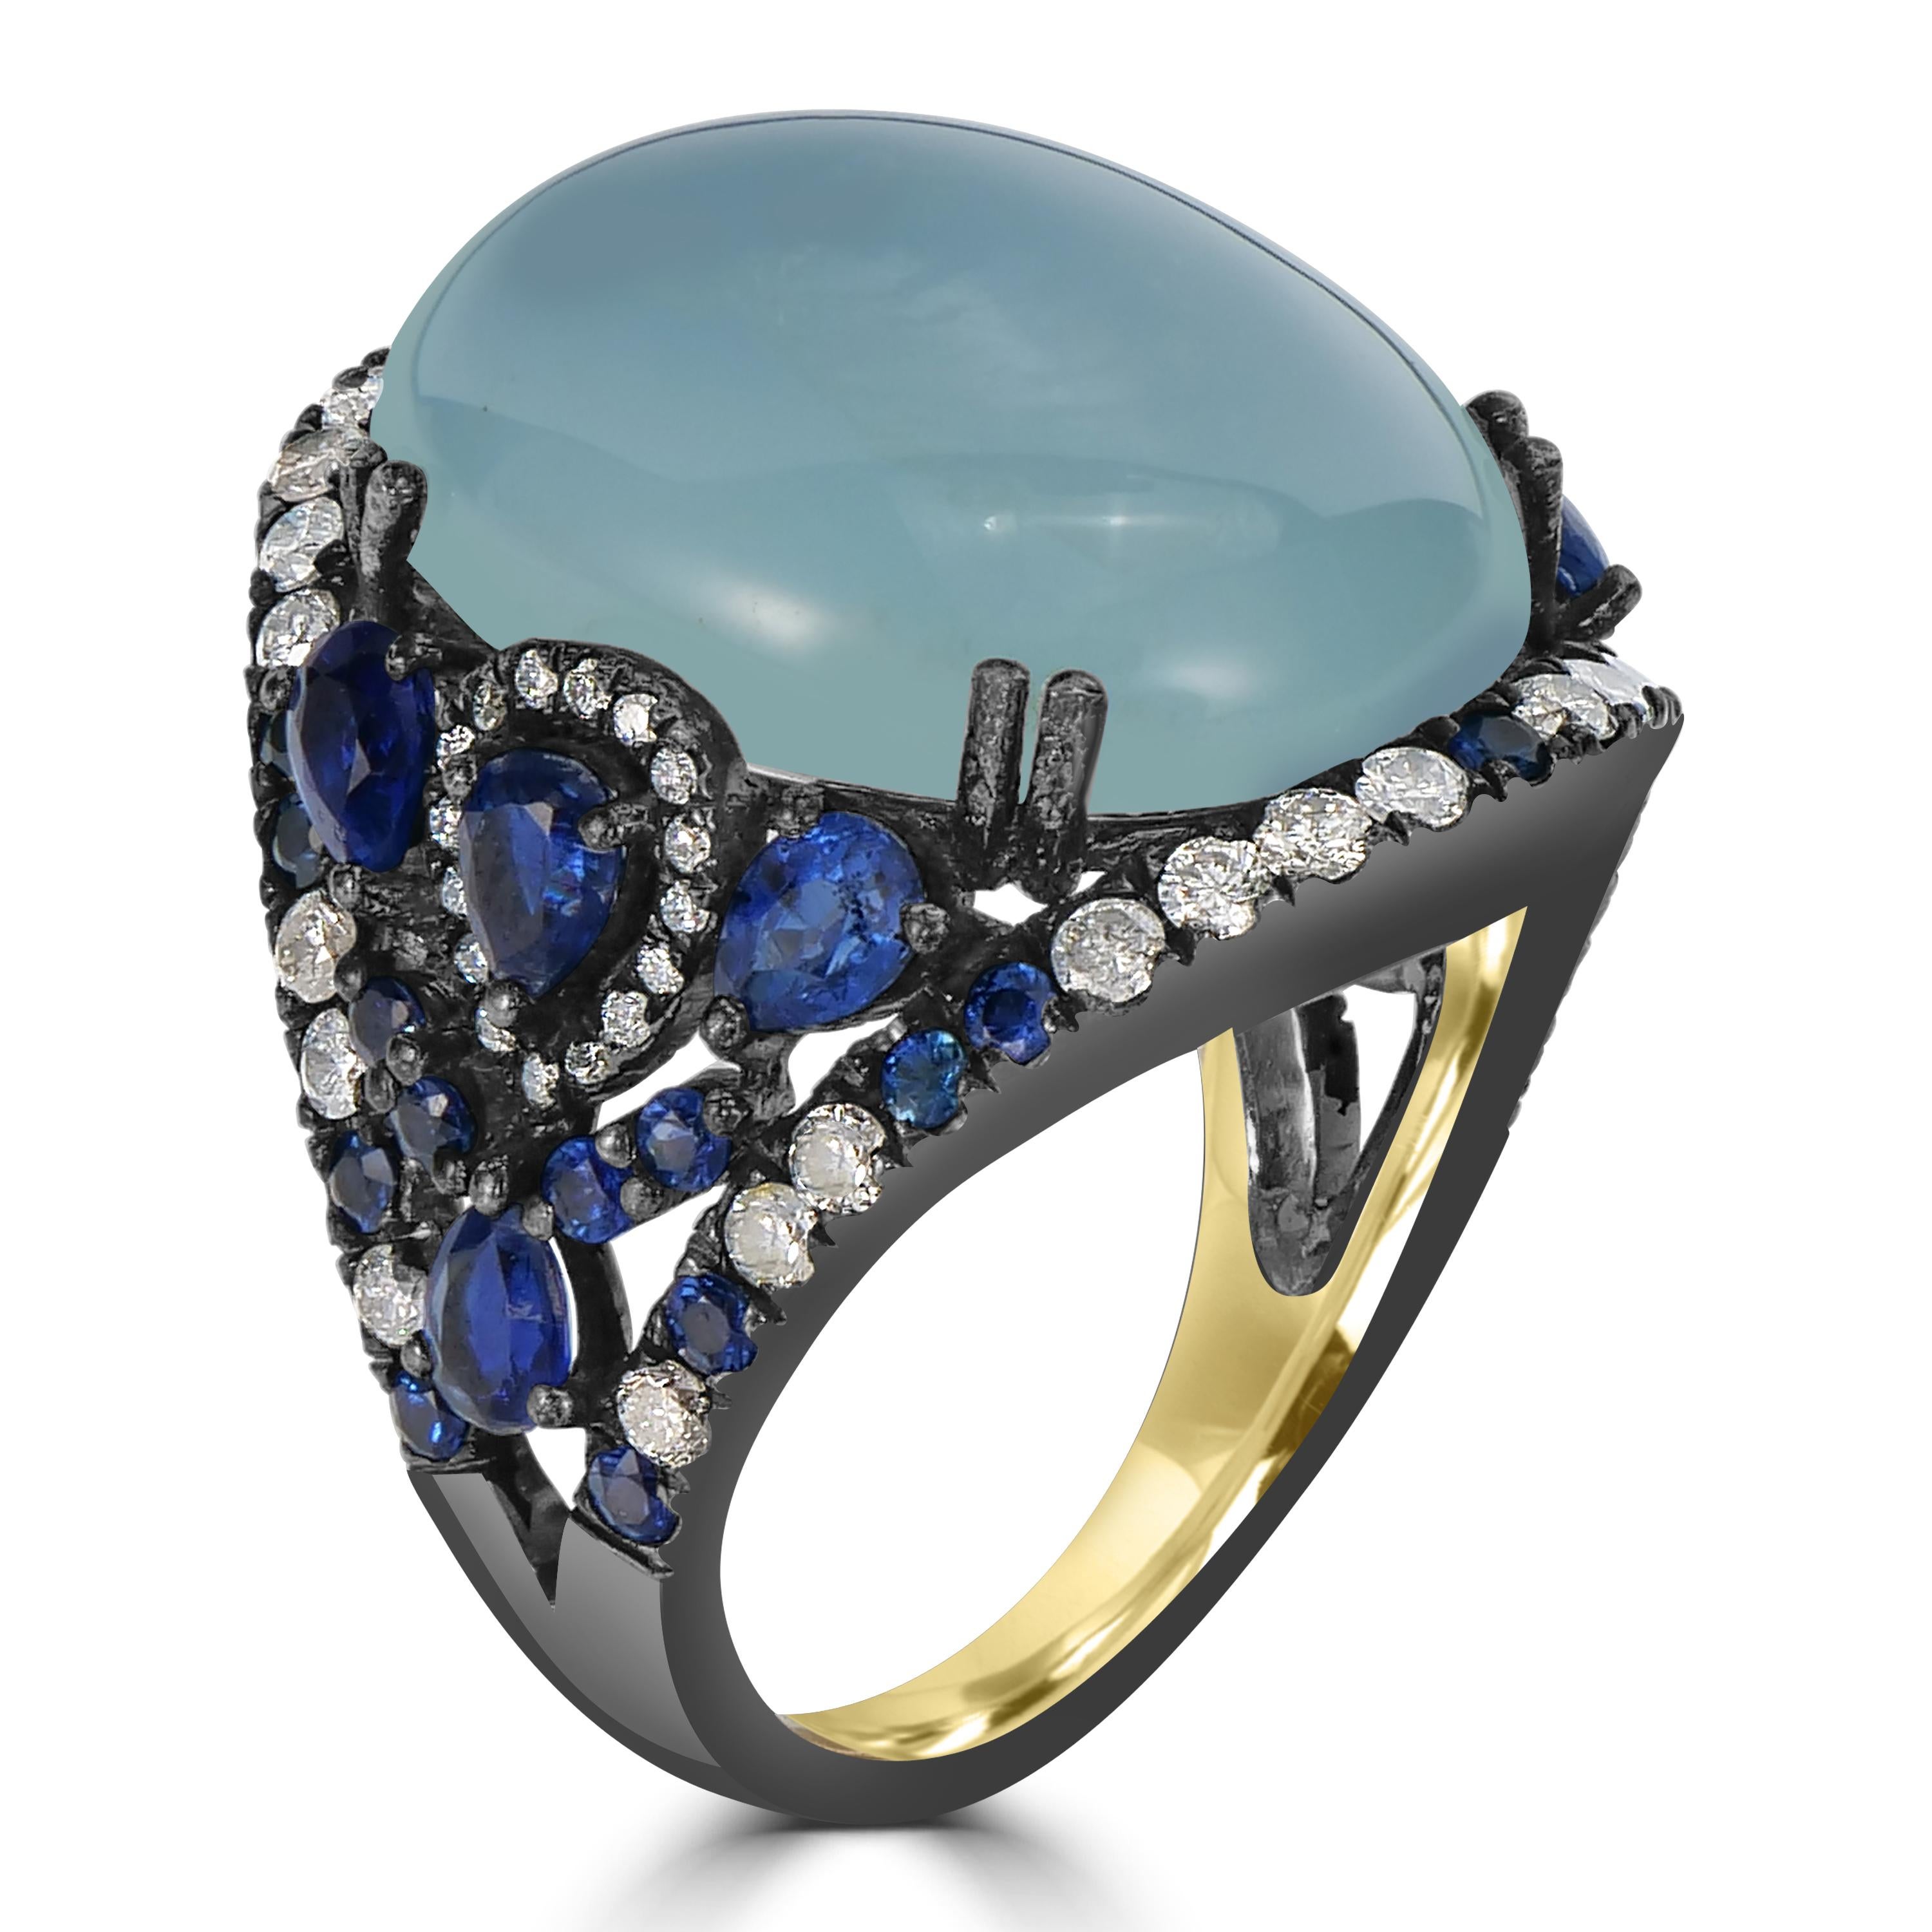 Introducing our stunning Victorian Split Shank Dome Ring, an exquisite piece that harmoniously combines the serene beauty of aquamarine, the rich allure of blue sapphires, the unique charm of kyanite, and the timeless sparkle of diamonds. Crafted in